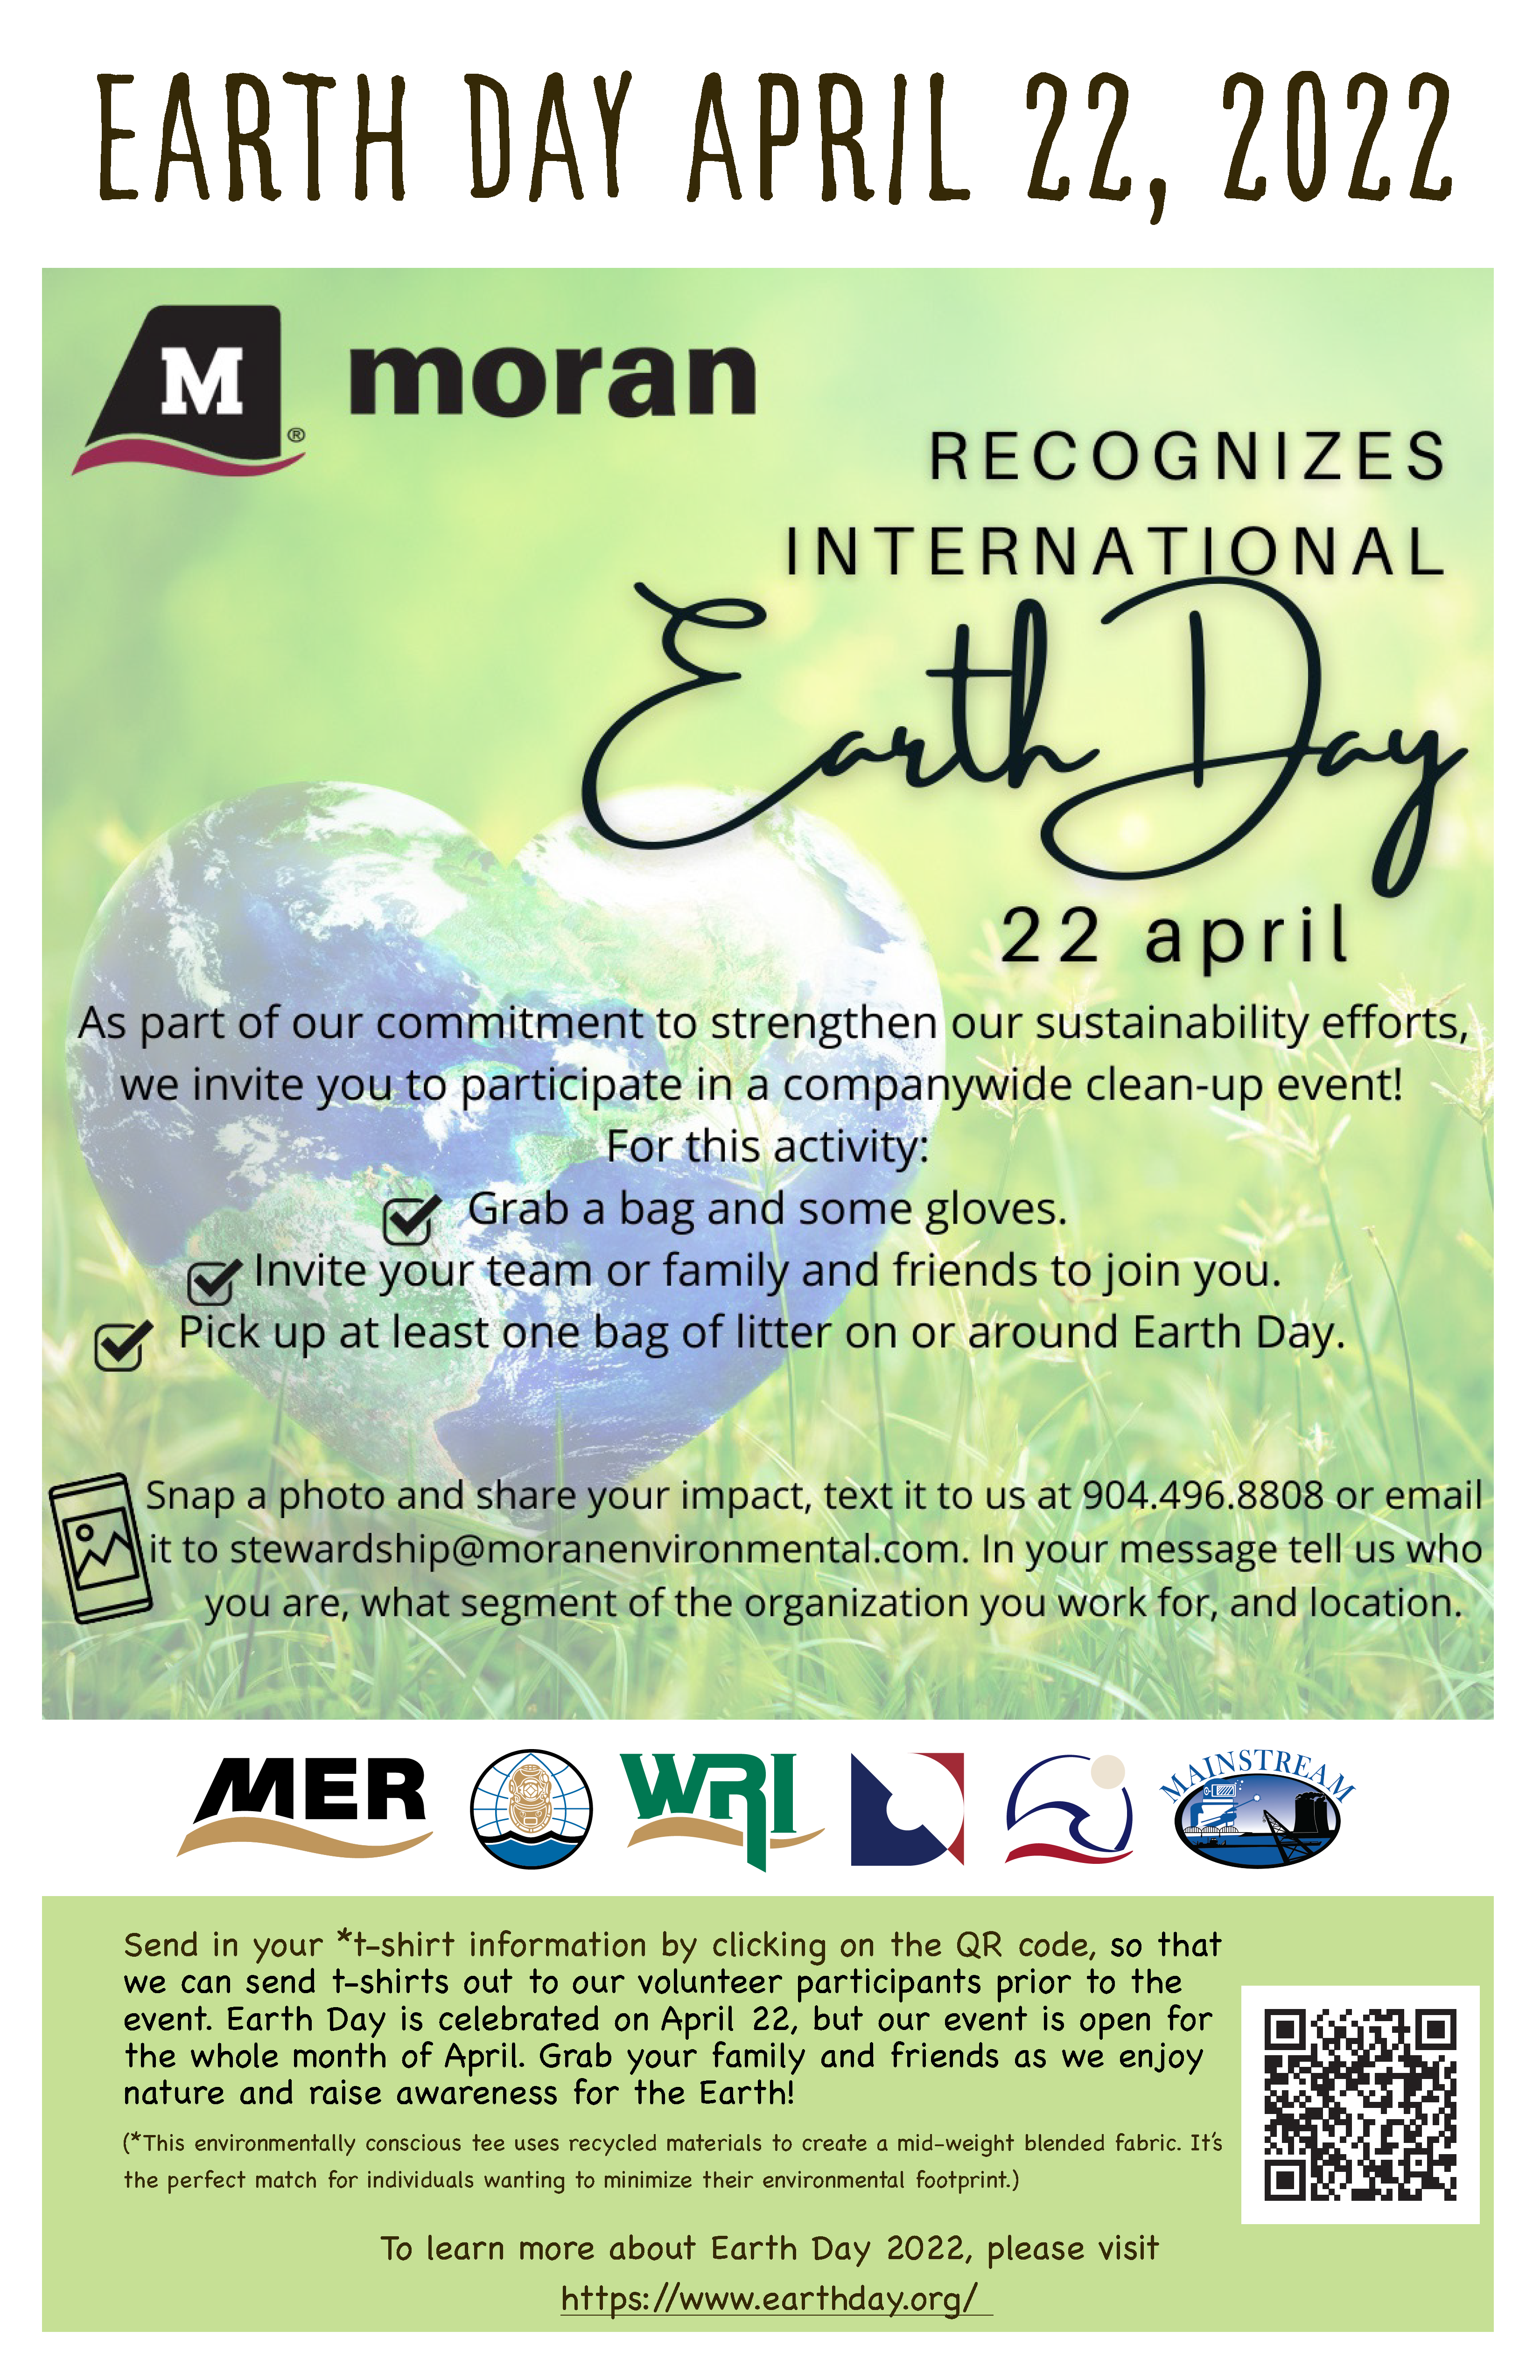 MER Celebrating Earth Day 2022 for the Month of April